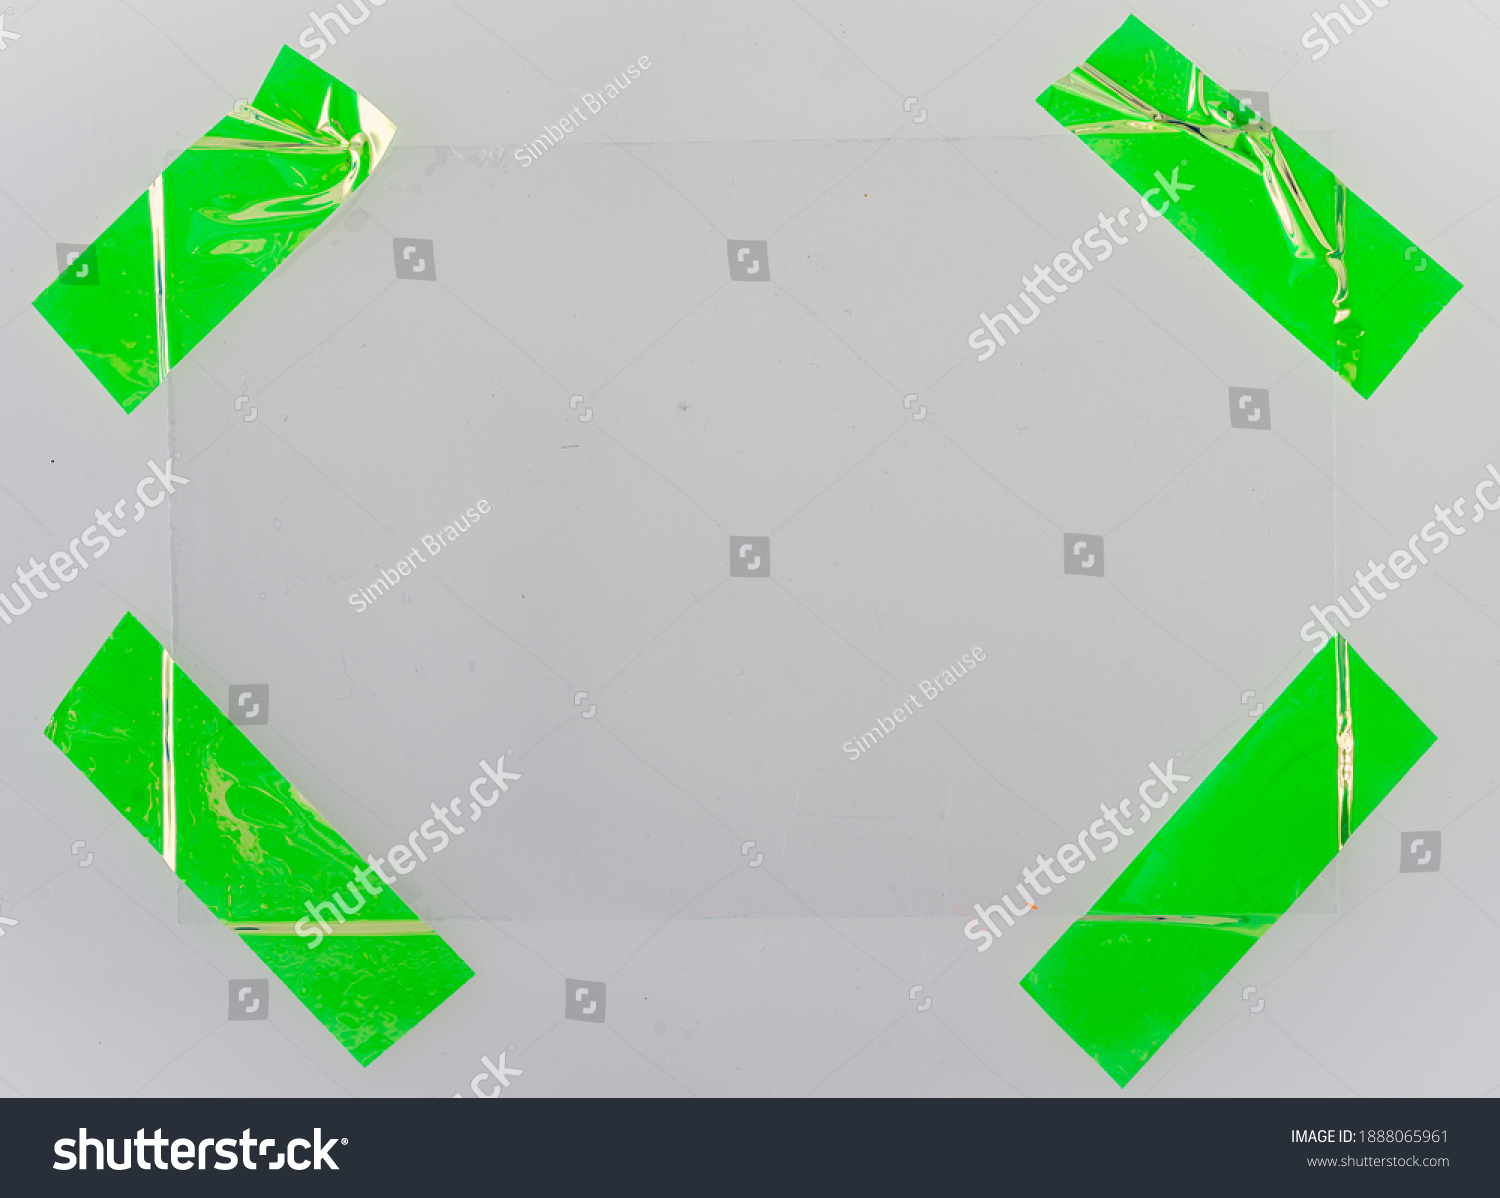 shiny green foil sticker snips on white background with real corner edge bulge, design elements for your social media collage, blend in your photo here. #1888065961